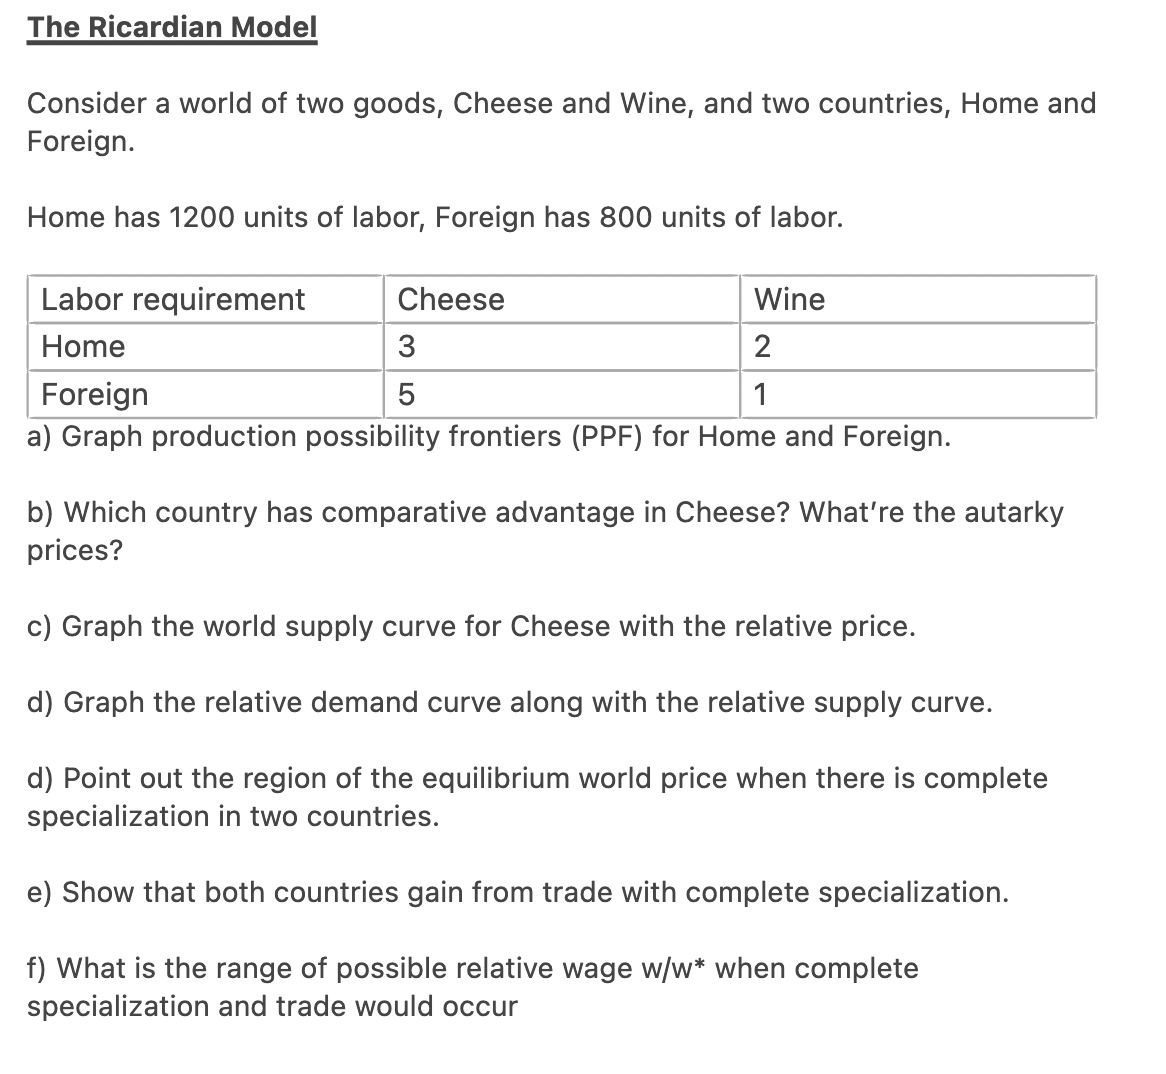 The Ricardian Model
Consider a world of two goods, Cheese and Wine, and two countries, Home and
Foreign.
Home has 1200 units of labor, Foreign has 800 units of labor.
Labor requirement
Home
Wine
2
Foreign
1
a) Graph production possibility frontiers (PPF) for Home and Foreign.
Cheese
3
5
b) Which country has comparative advantage in Cheese? What're the autarky
prices?
c) Graph the world supply curve for Cheese with the relative price.
d) Graph the relative demand curve along with the relative supply curve.
d) Point out the region of the equilibrium world price when there is complete
specialization in two countries.
e) Show that both countries gain from trade with complete specialization.
f) What is the range of possible relative wage w/w* when complete
specialization and trade would occur